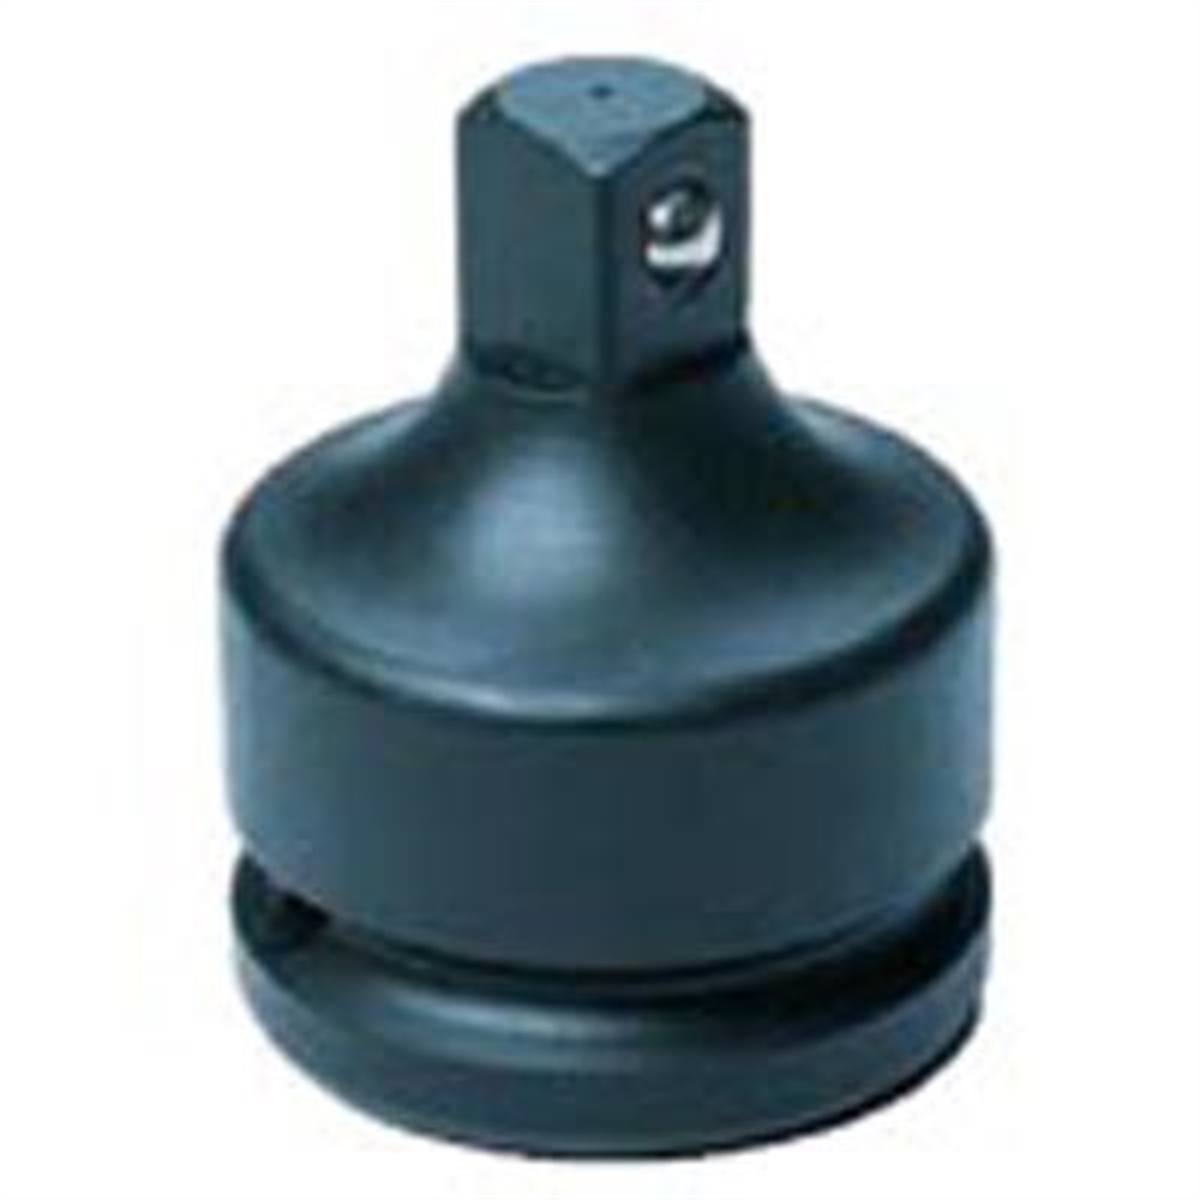 3/4" Female x 1" Male Adapter with Locking Pin